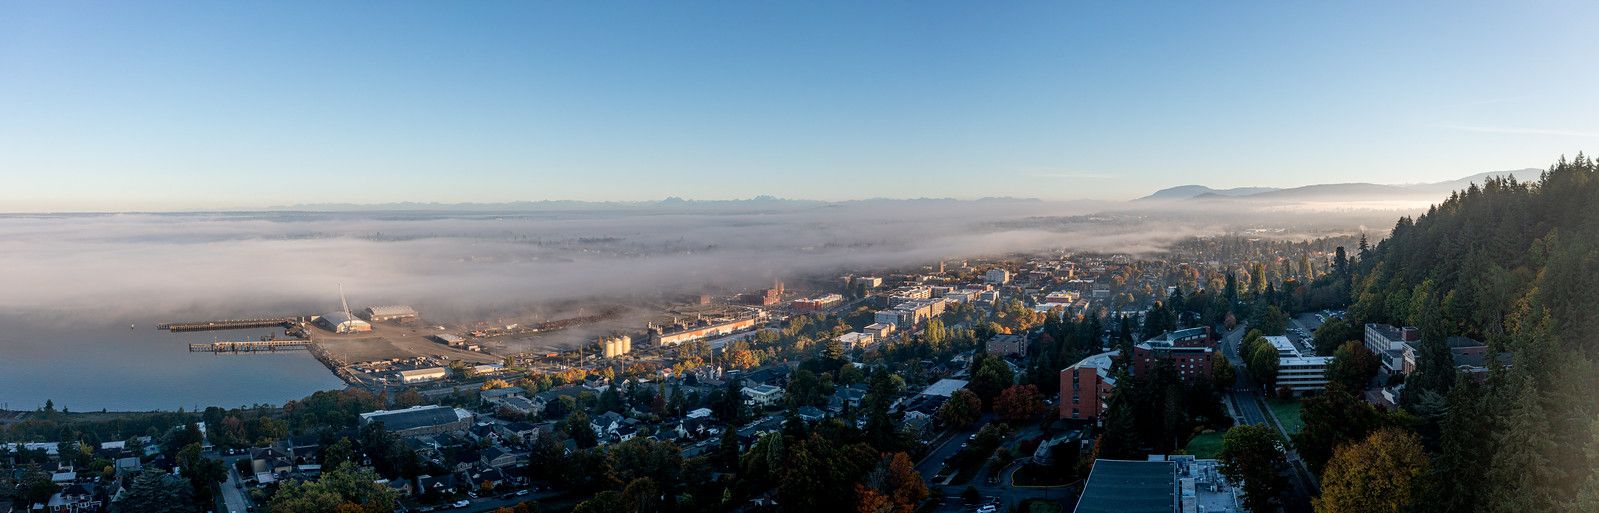 A misty Bellingham with fog enveloping buildings and trees, creating an atmospheric view.